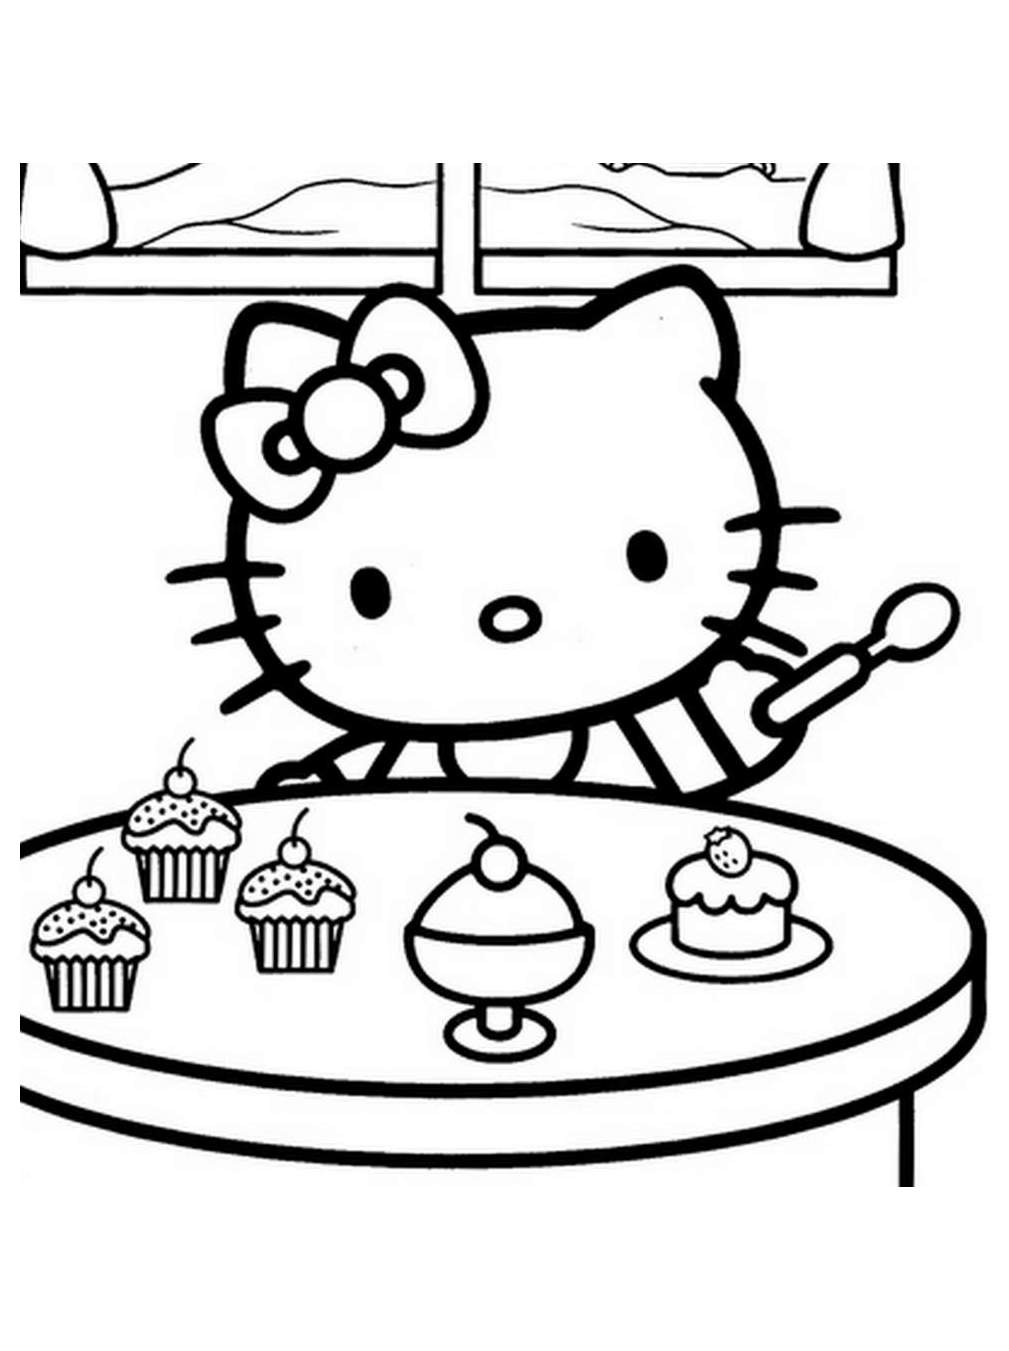 Download Hello kitty free to color for kids - Hello Kitty Kids ...